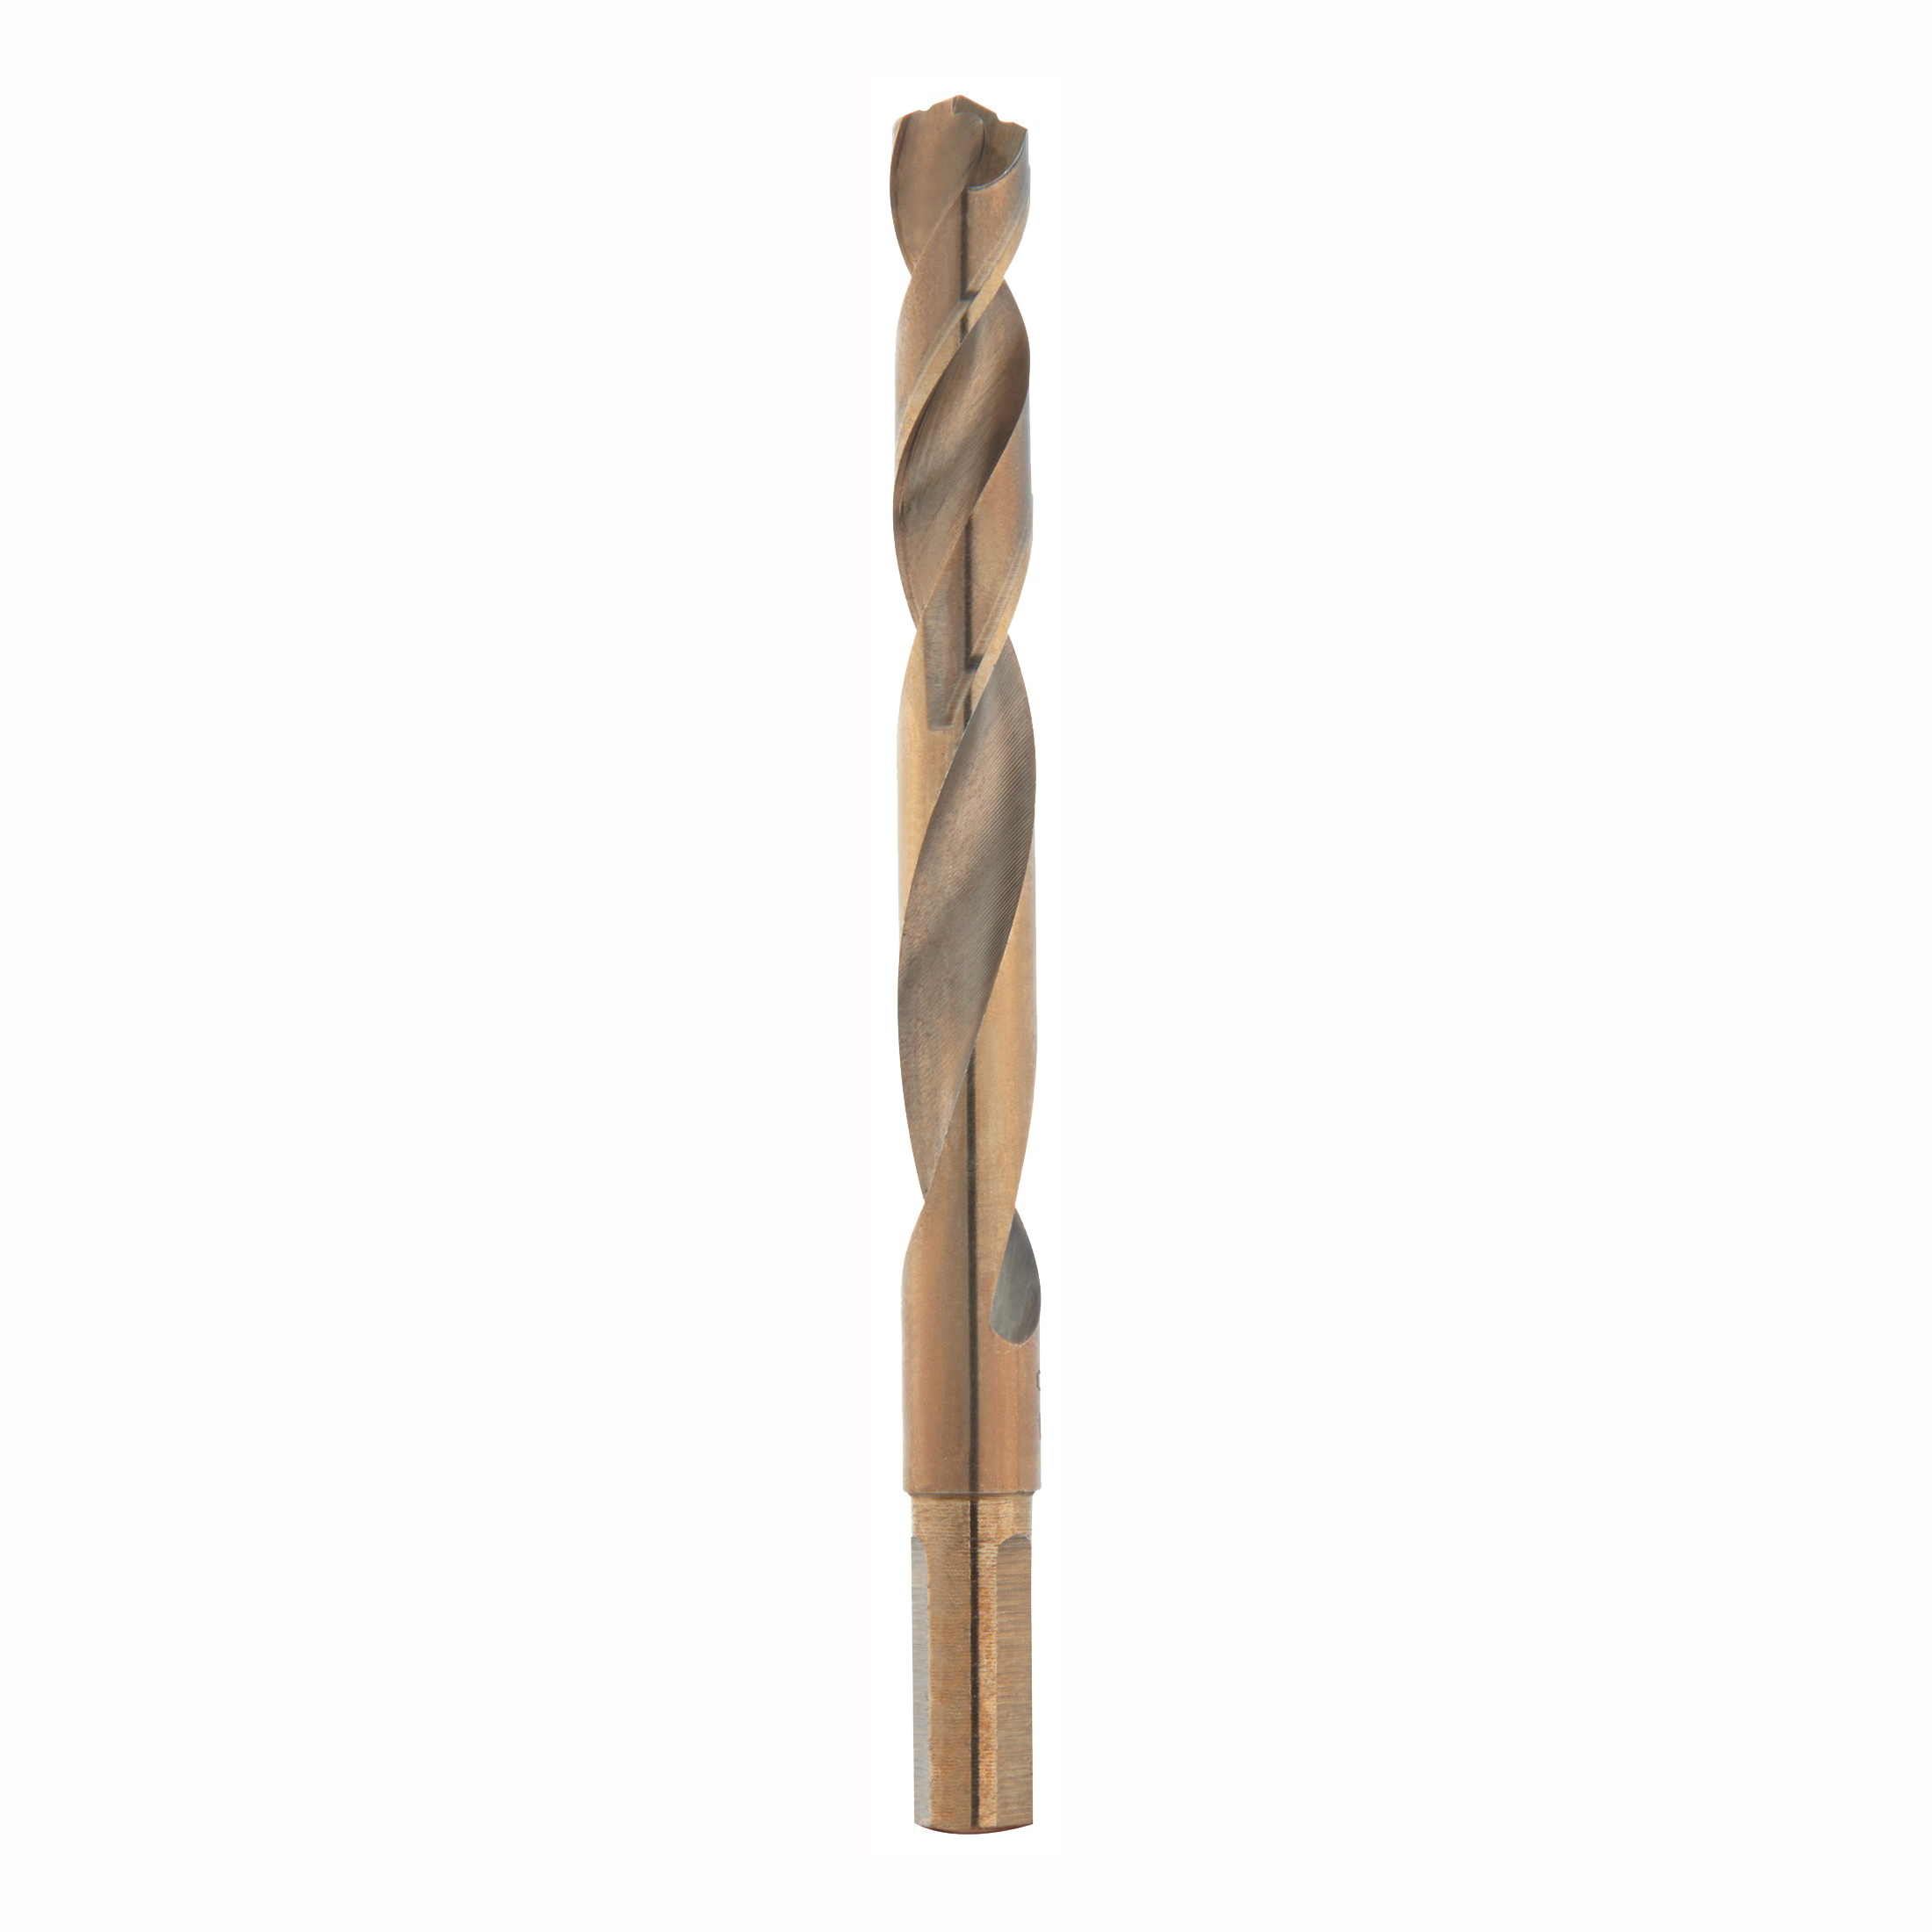 RED HELIX 48-89-2324 Drill Bit, 27/64 in Dia, 5.12 in OAL, 3/8 in Dia Shank, 3-Flat, Reduced Shank